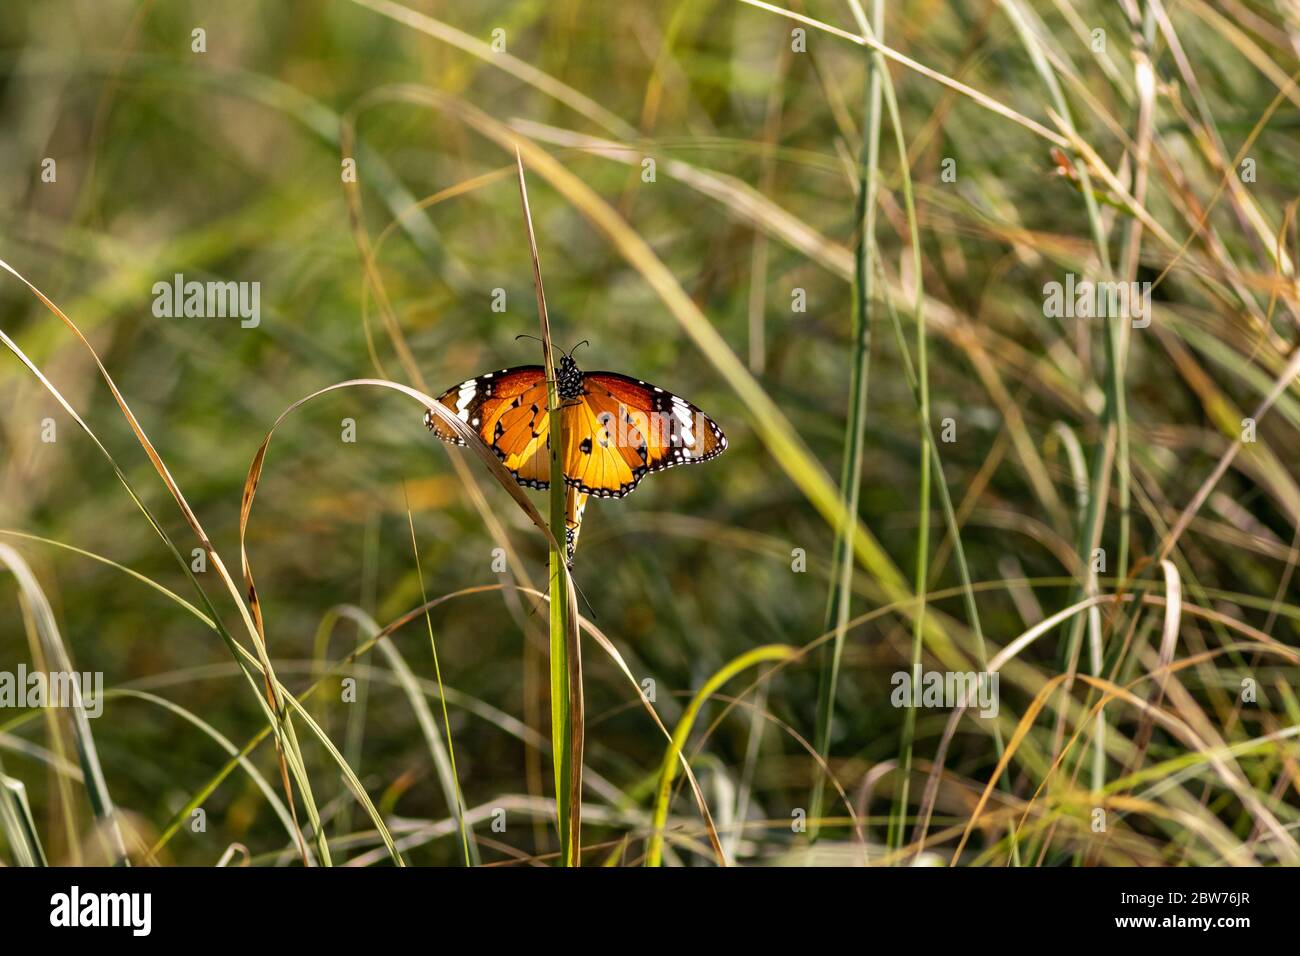 Plain Tiger or Danaus chrysippus or African queen or African Monarch butterfly mating at keoladeo national park or bharatpur bird sanctuary, rajasthan Stock Photo